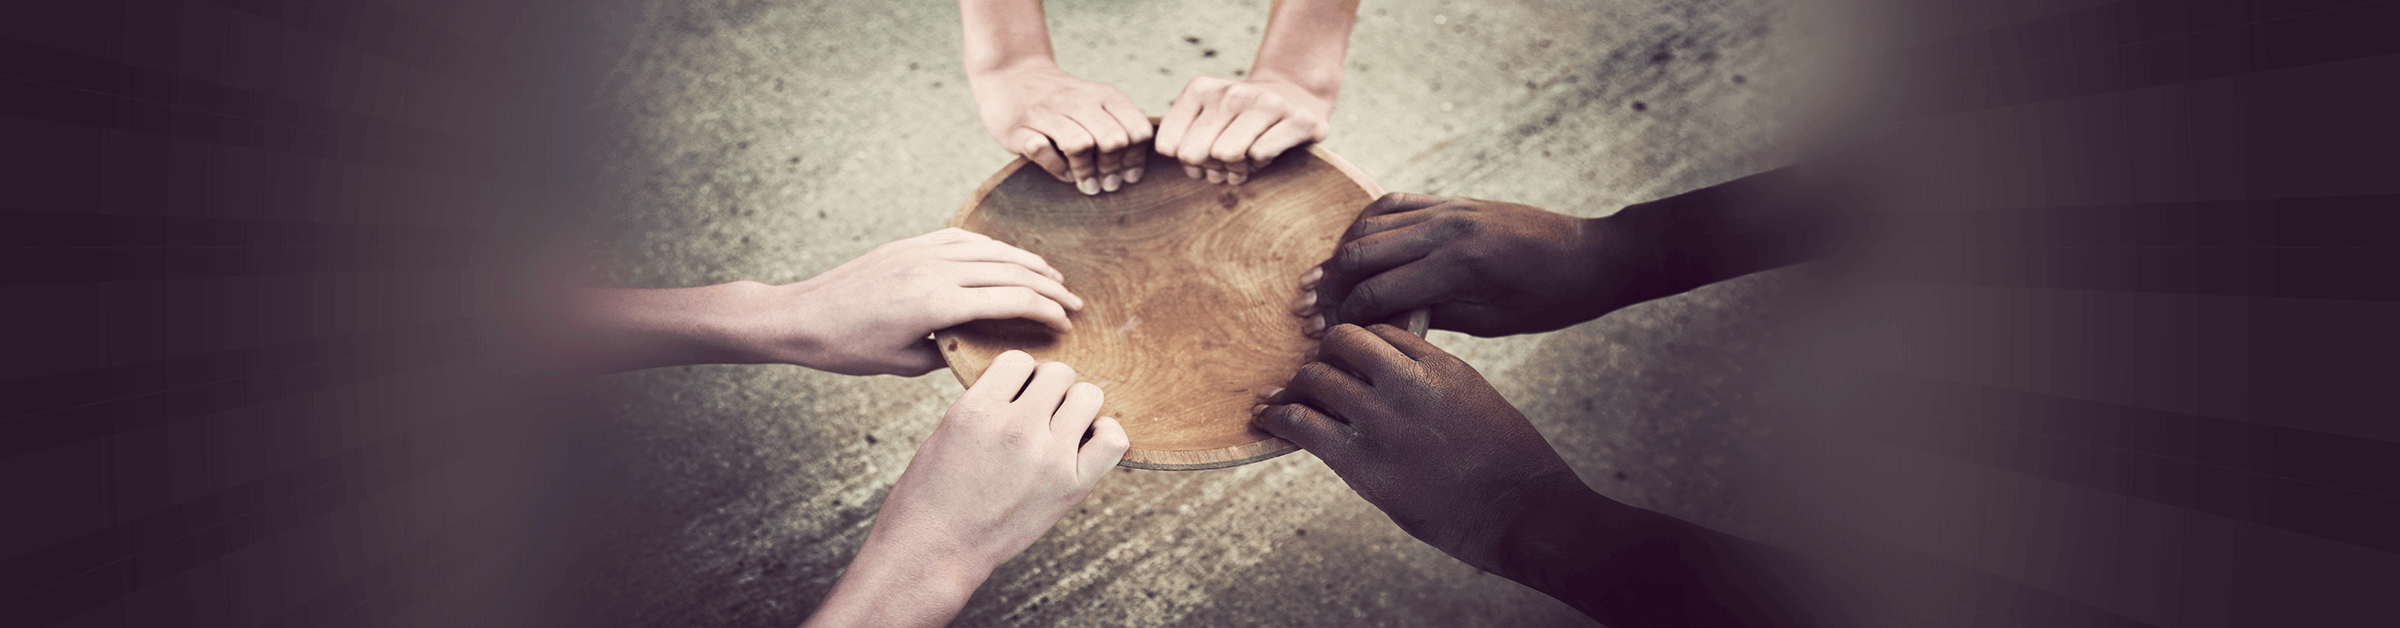 3 pairs of hands of different skin colors grasp the rim of an empty bowl